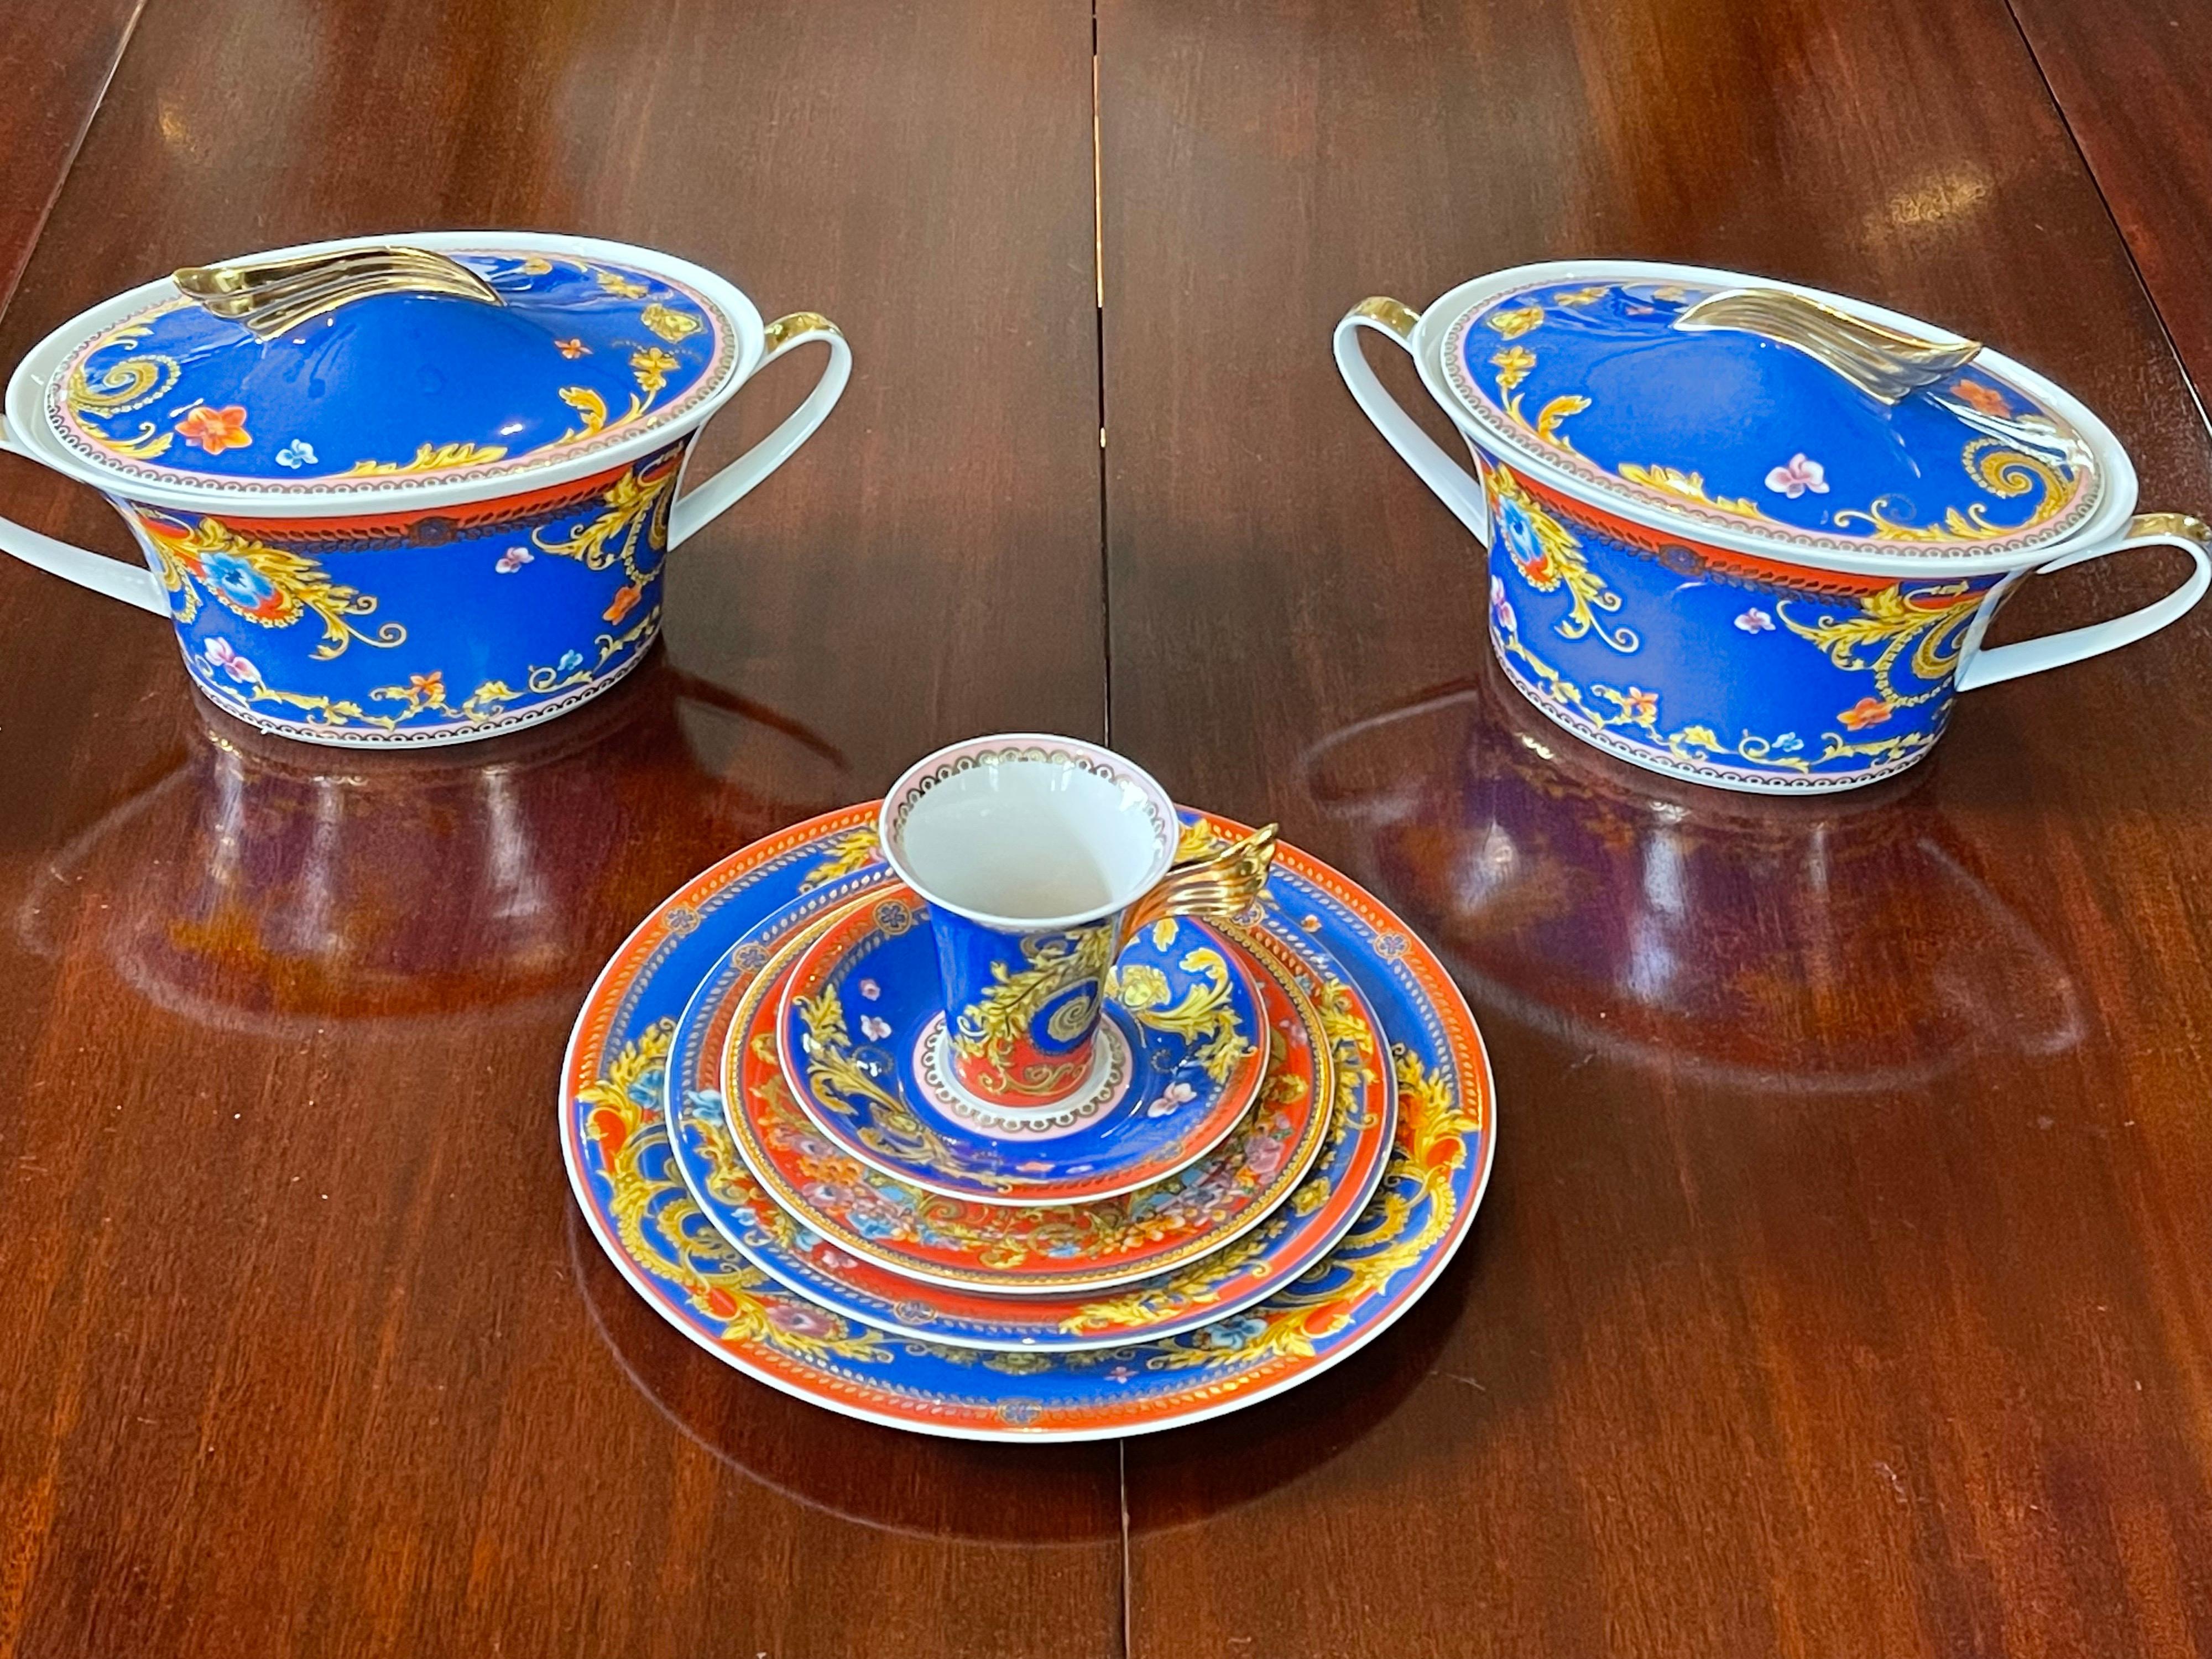 These Rosenthal porcelain lidded serving dishes where Designed by Versace in the “Primavera” pattern.
As part of the expansion Versace - Gianni sought to bring his aesthetic’s to fine dining. In 1993 he teamed up with Rosenthal, the German design